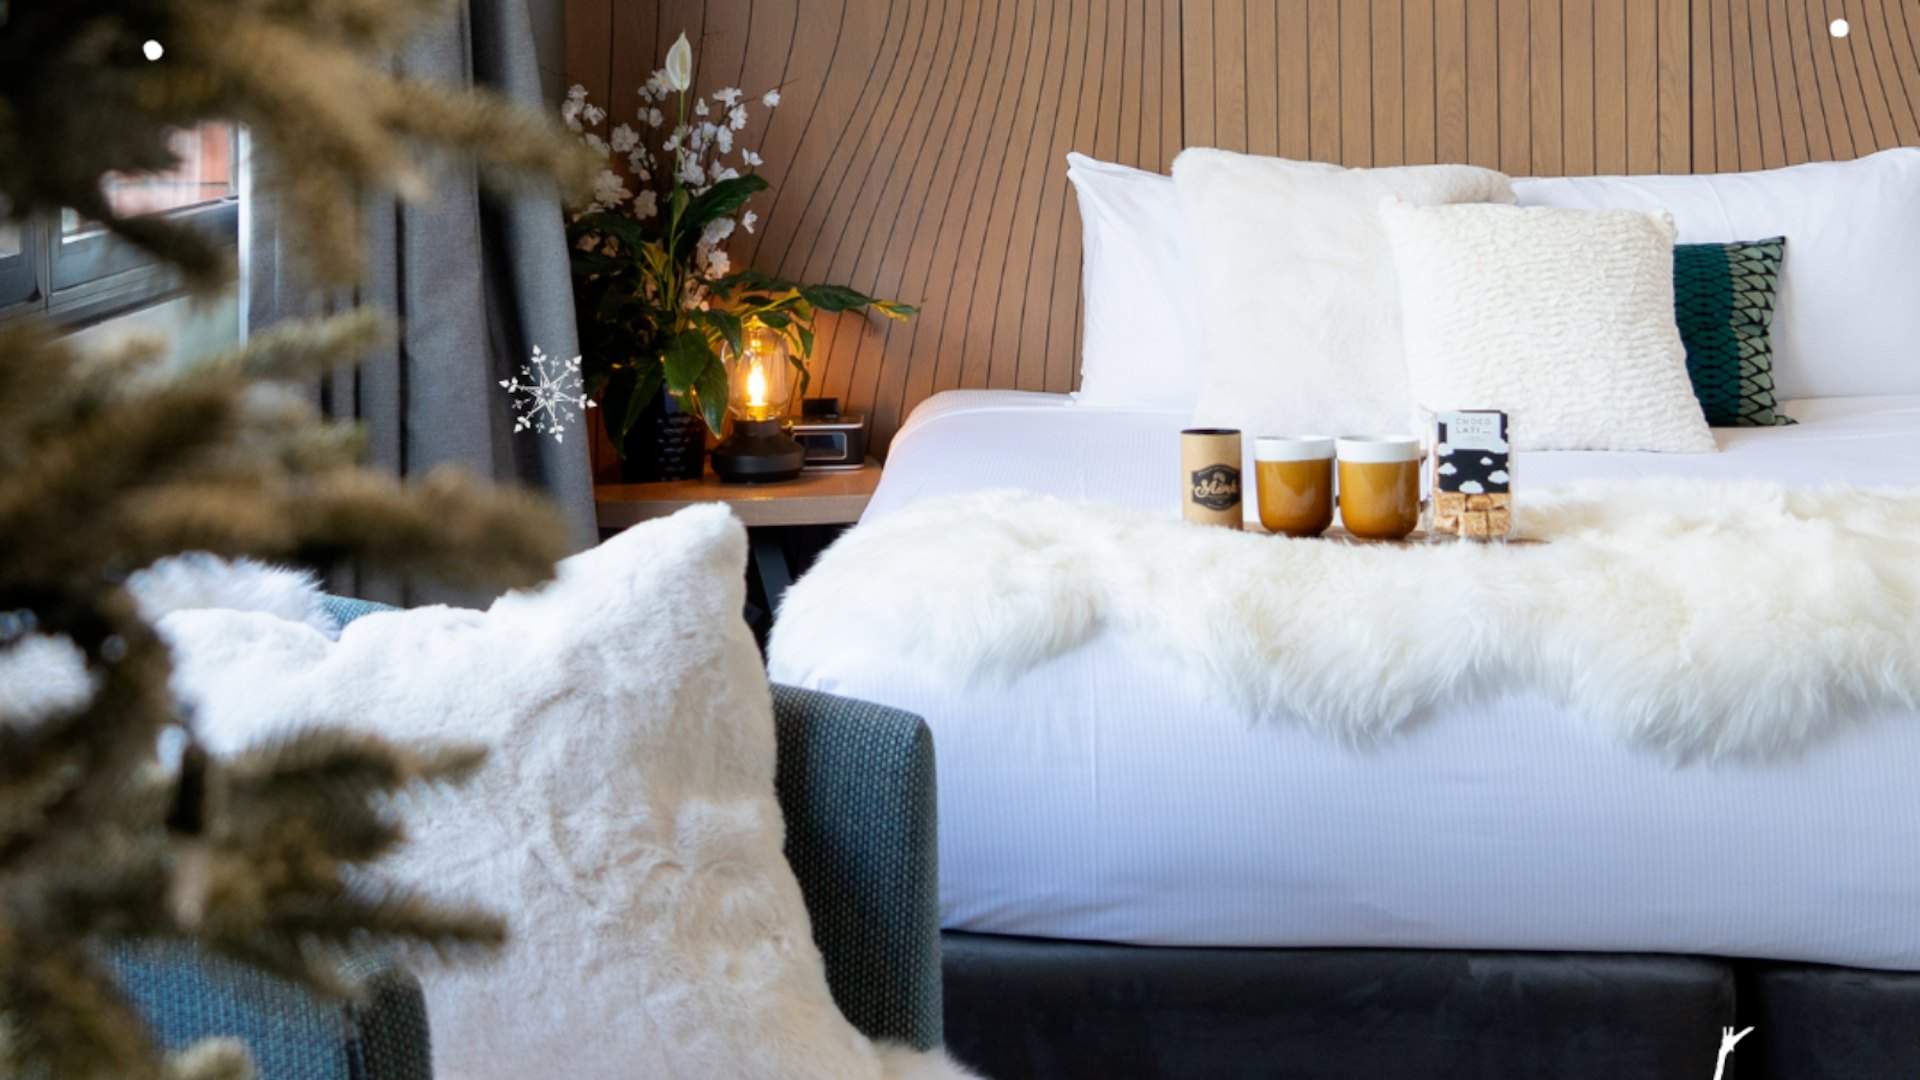 DoubleTree by Hilton Has Reimagined One of Its Hotel Rooms as a White Christmas-Themed Paradise